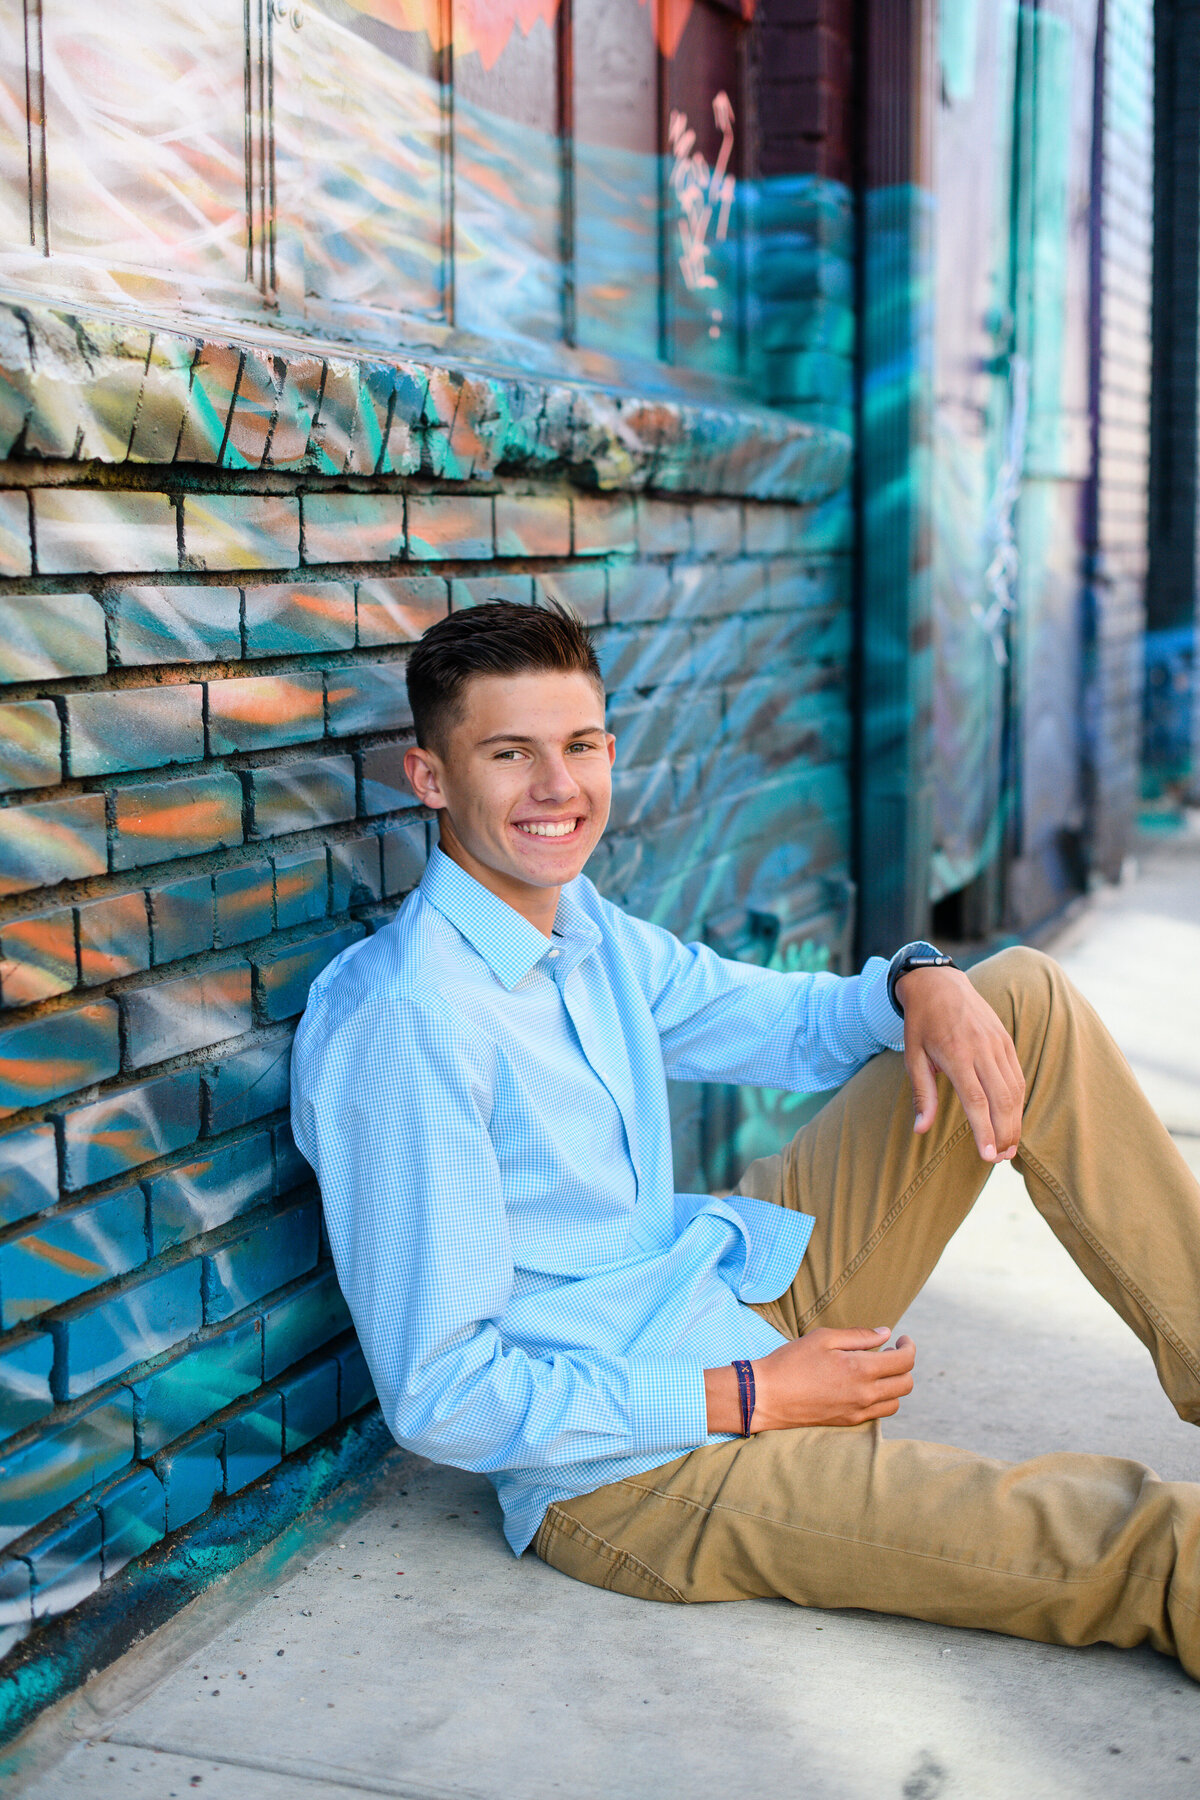 denver senior photographer captures senior guy photo ideas with young man sitting on the ground while wearing a blue button down and leaning against a wall mural in downtown denver with denver senior photographer